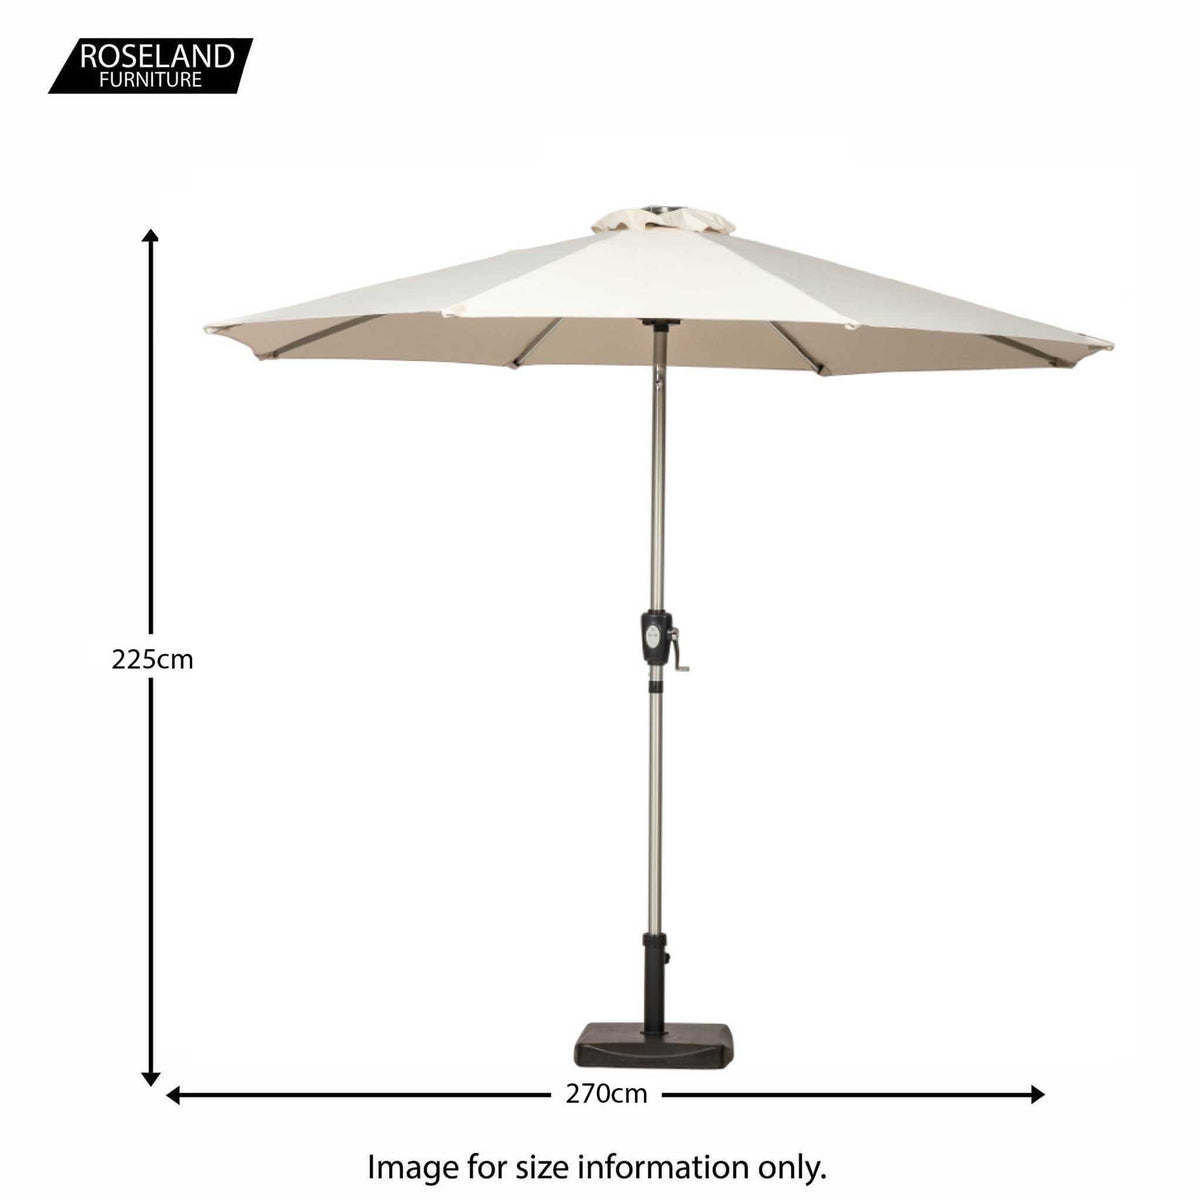 2.7m Ivory LED Lit Solar Powered Outdoor Crank and Tilt Parasol - Size Guide